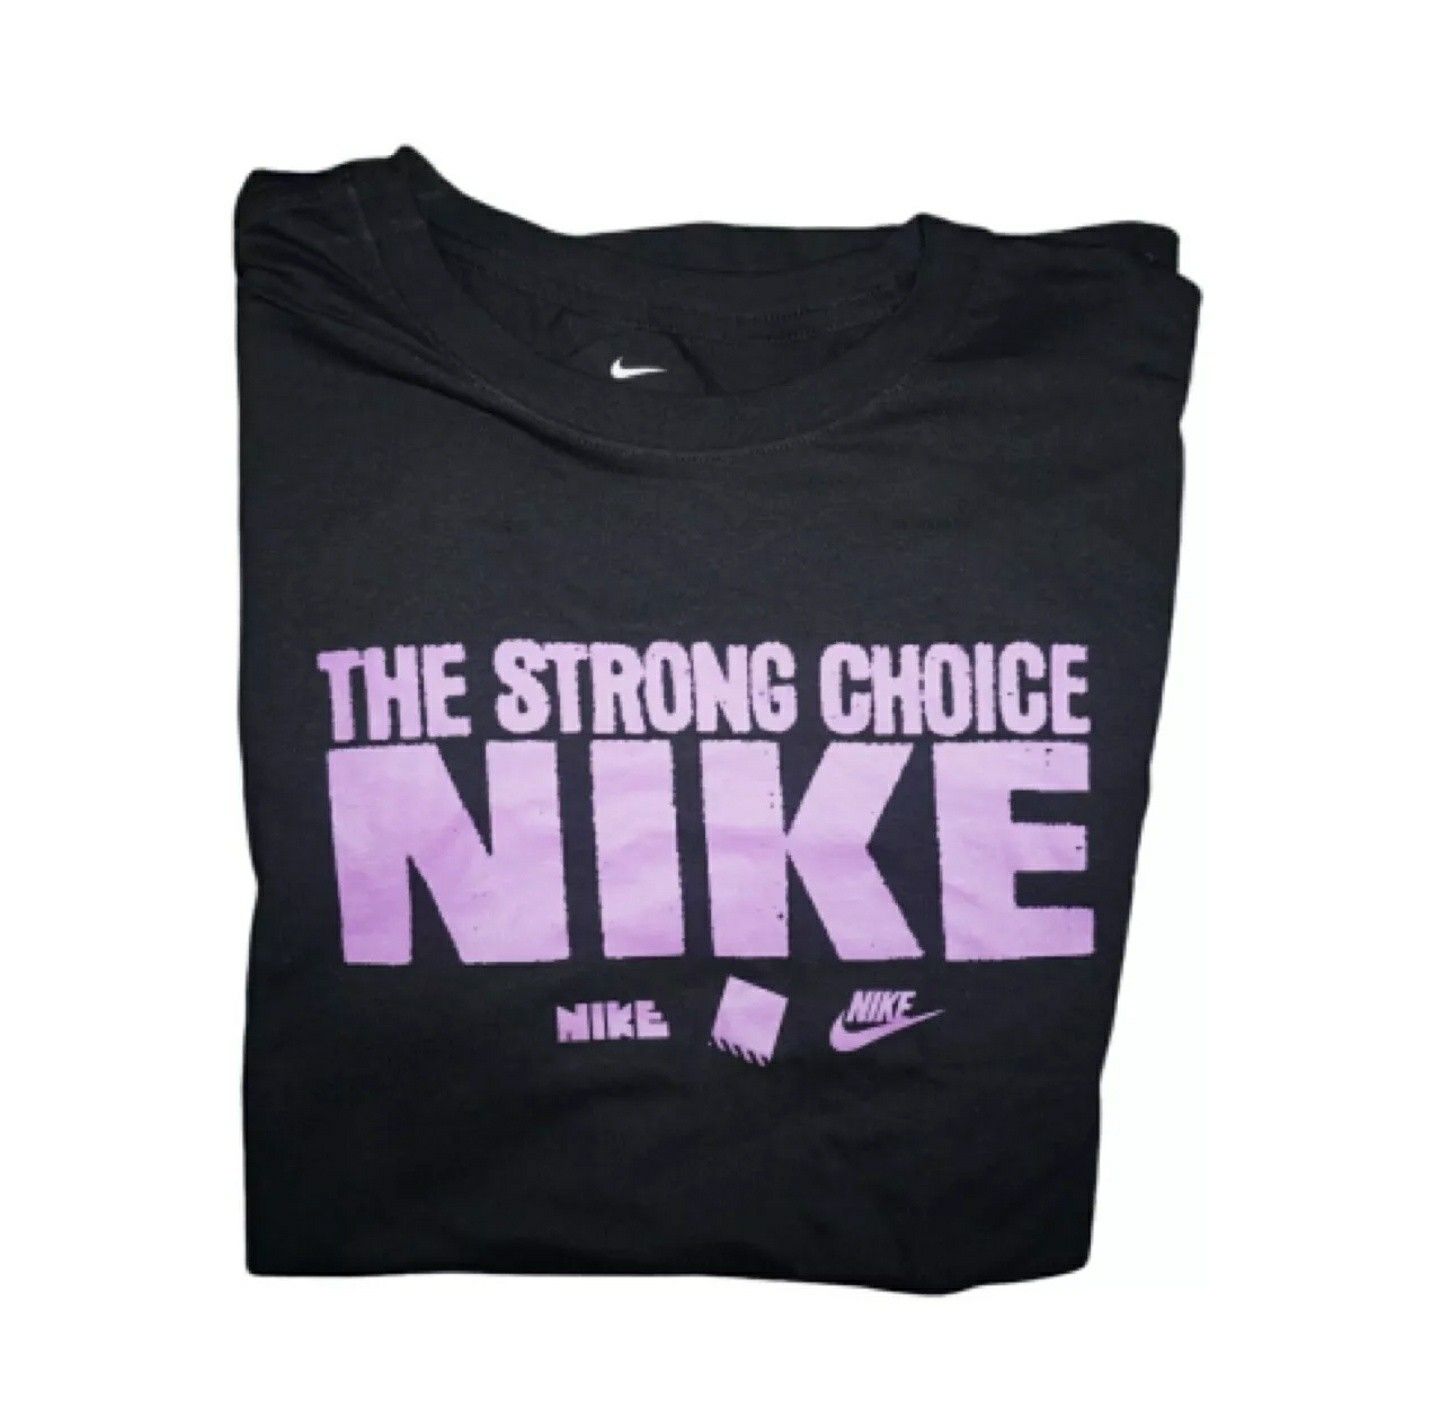 New Men’s Nike Athletic Cut T-Shirt 100% Authentic Tee Just Do It Sports Size XL